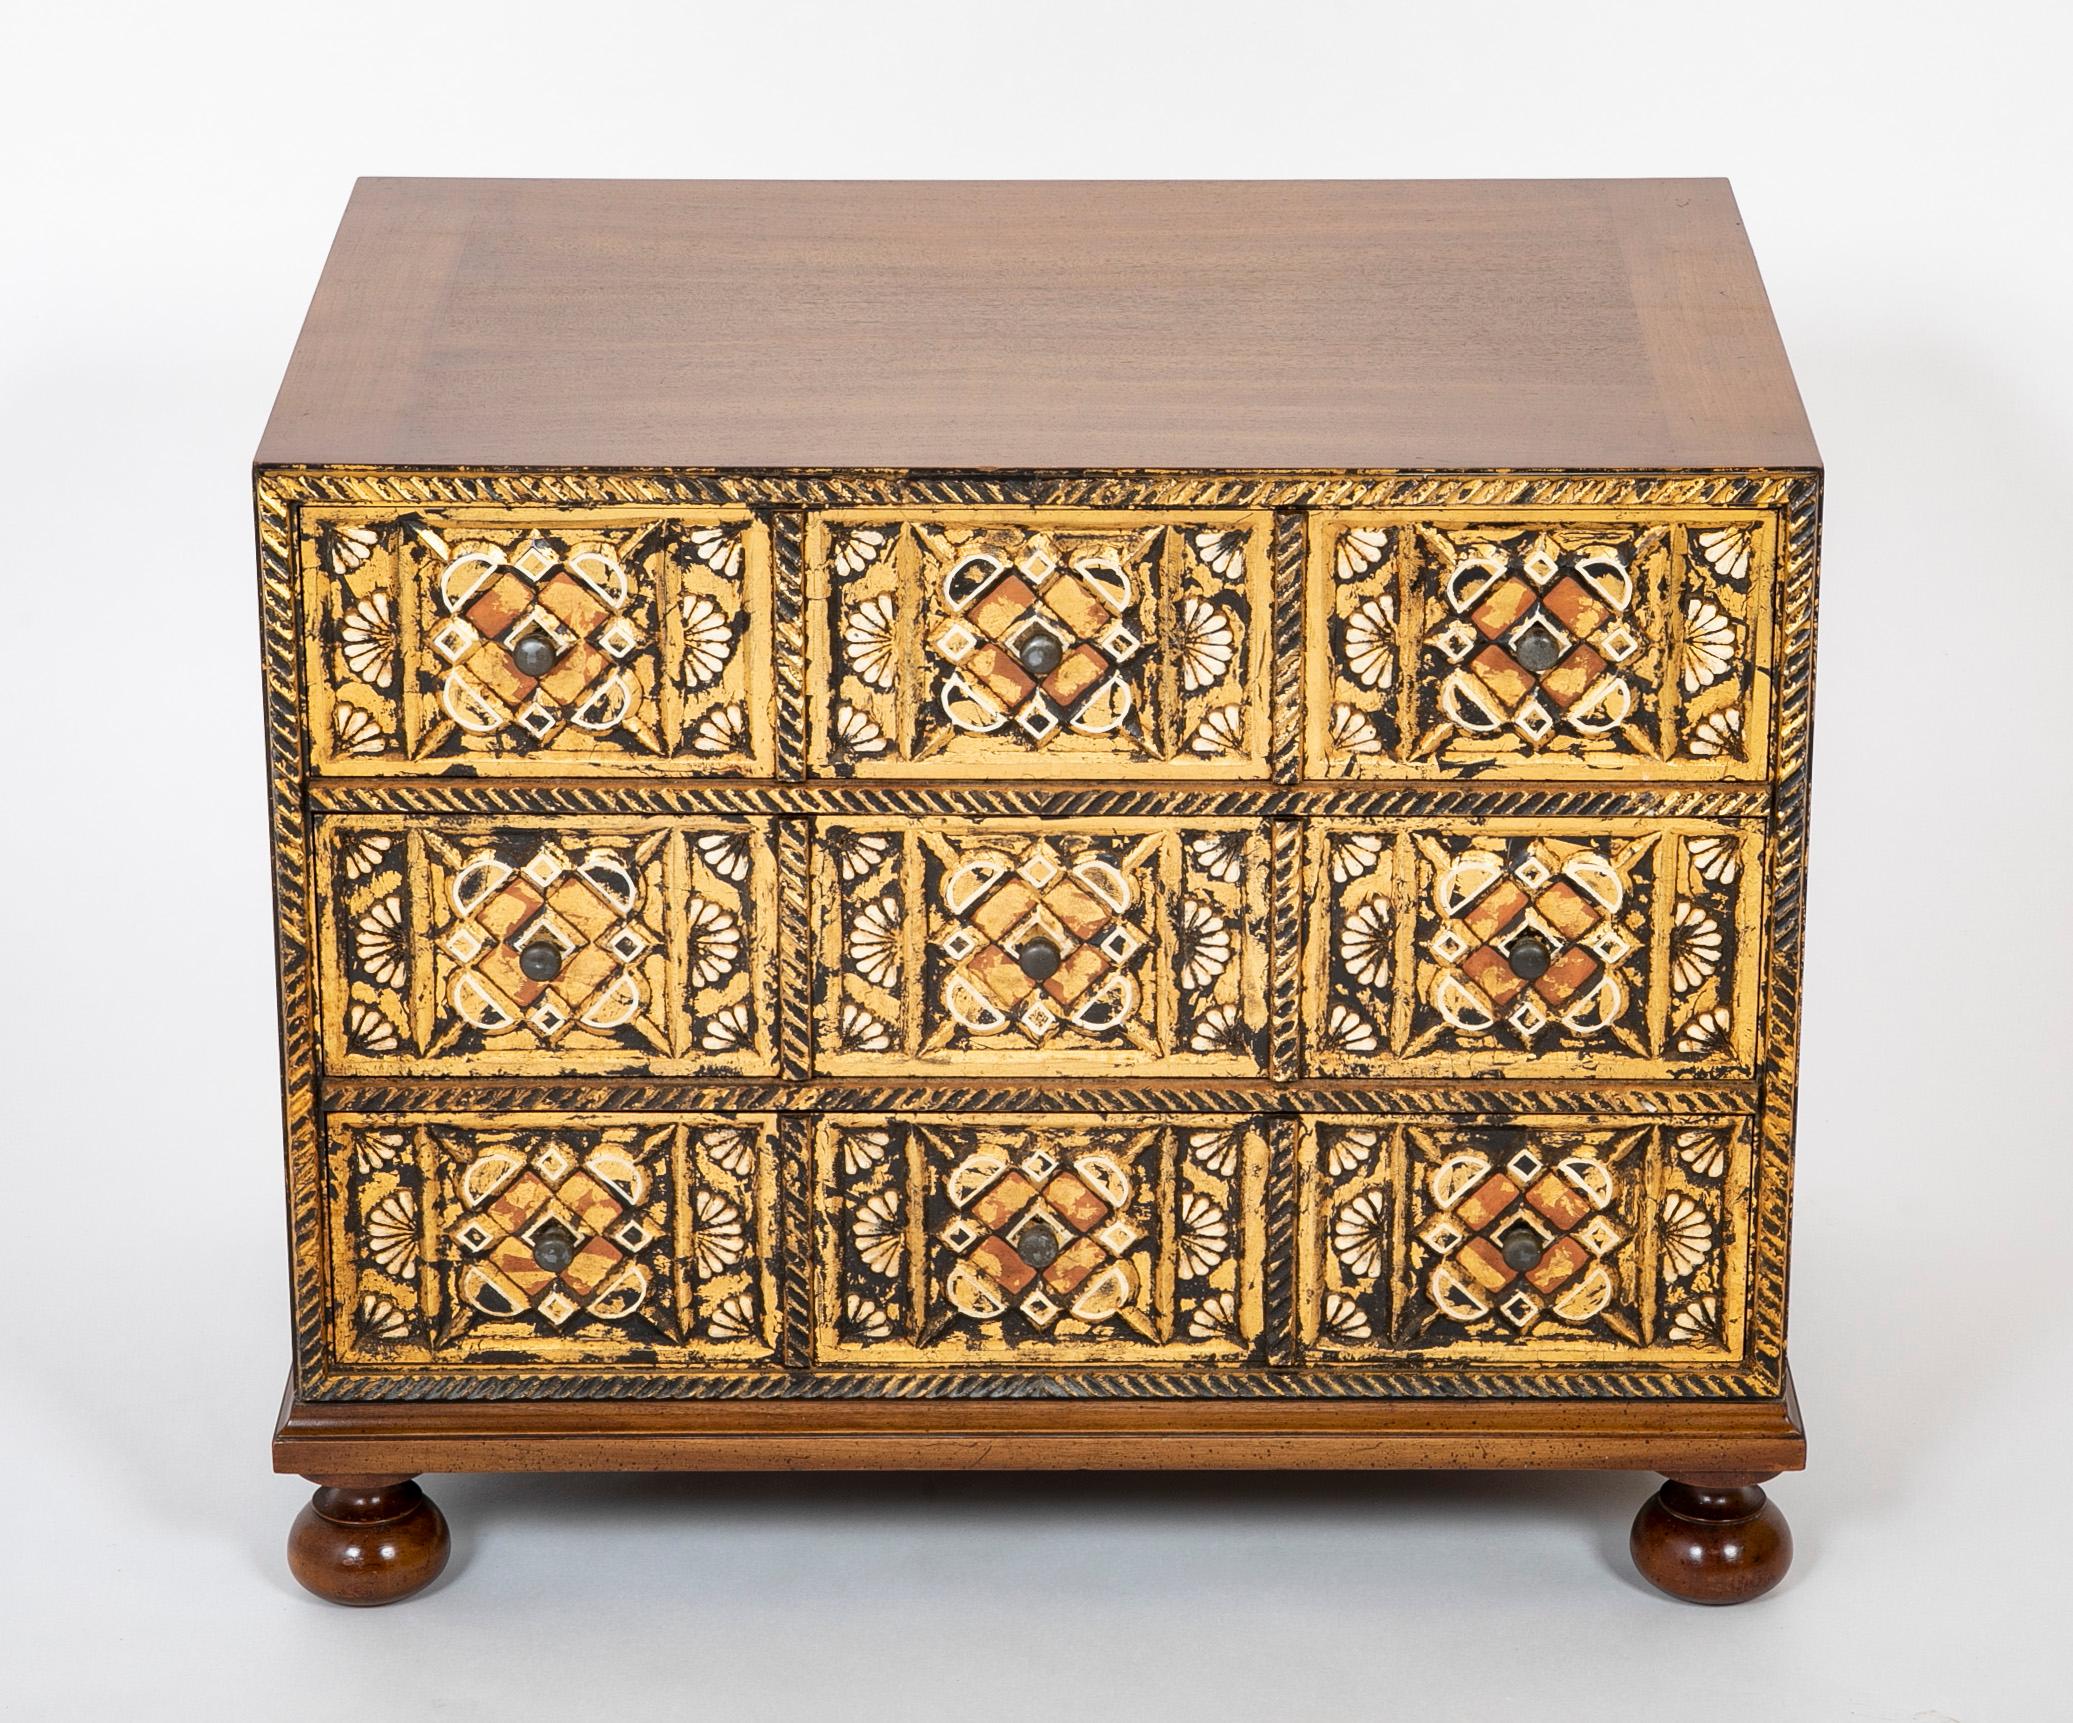 Stunning pair of John Widdicomb Spanish style bedside chests. The drawer fronts beautifully carved, painted and gilt in the style of a Spanish Baroque period vargueno. The geometric and fan motifs show the Moorish influence in early Spanish